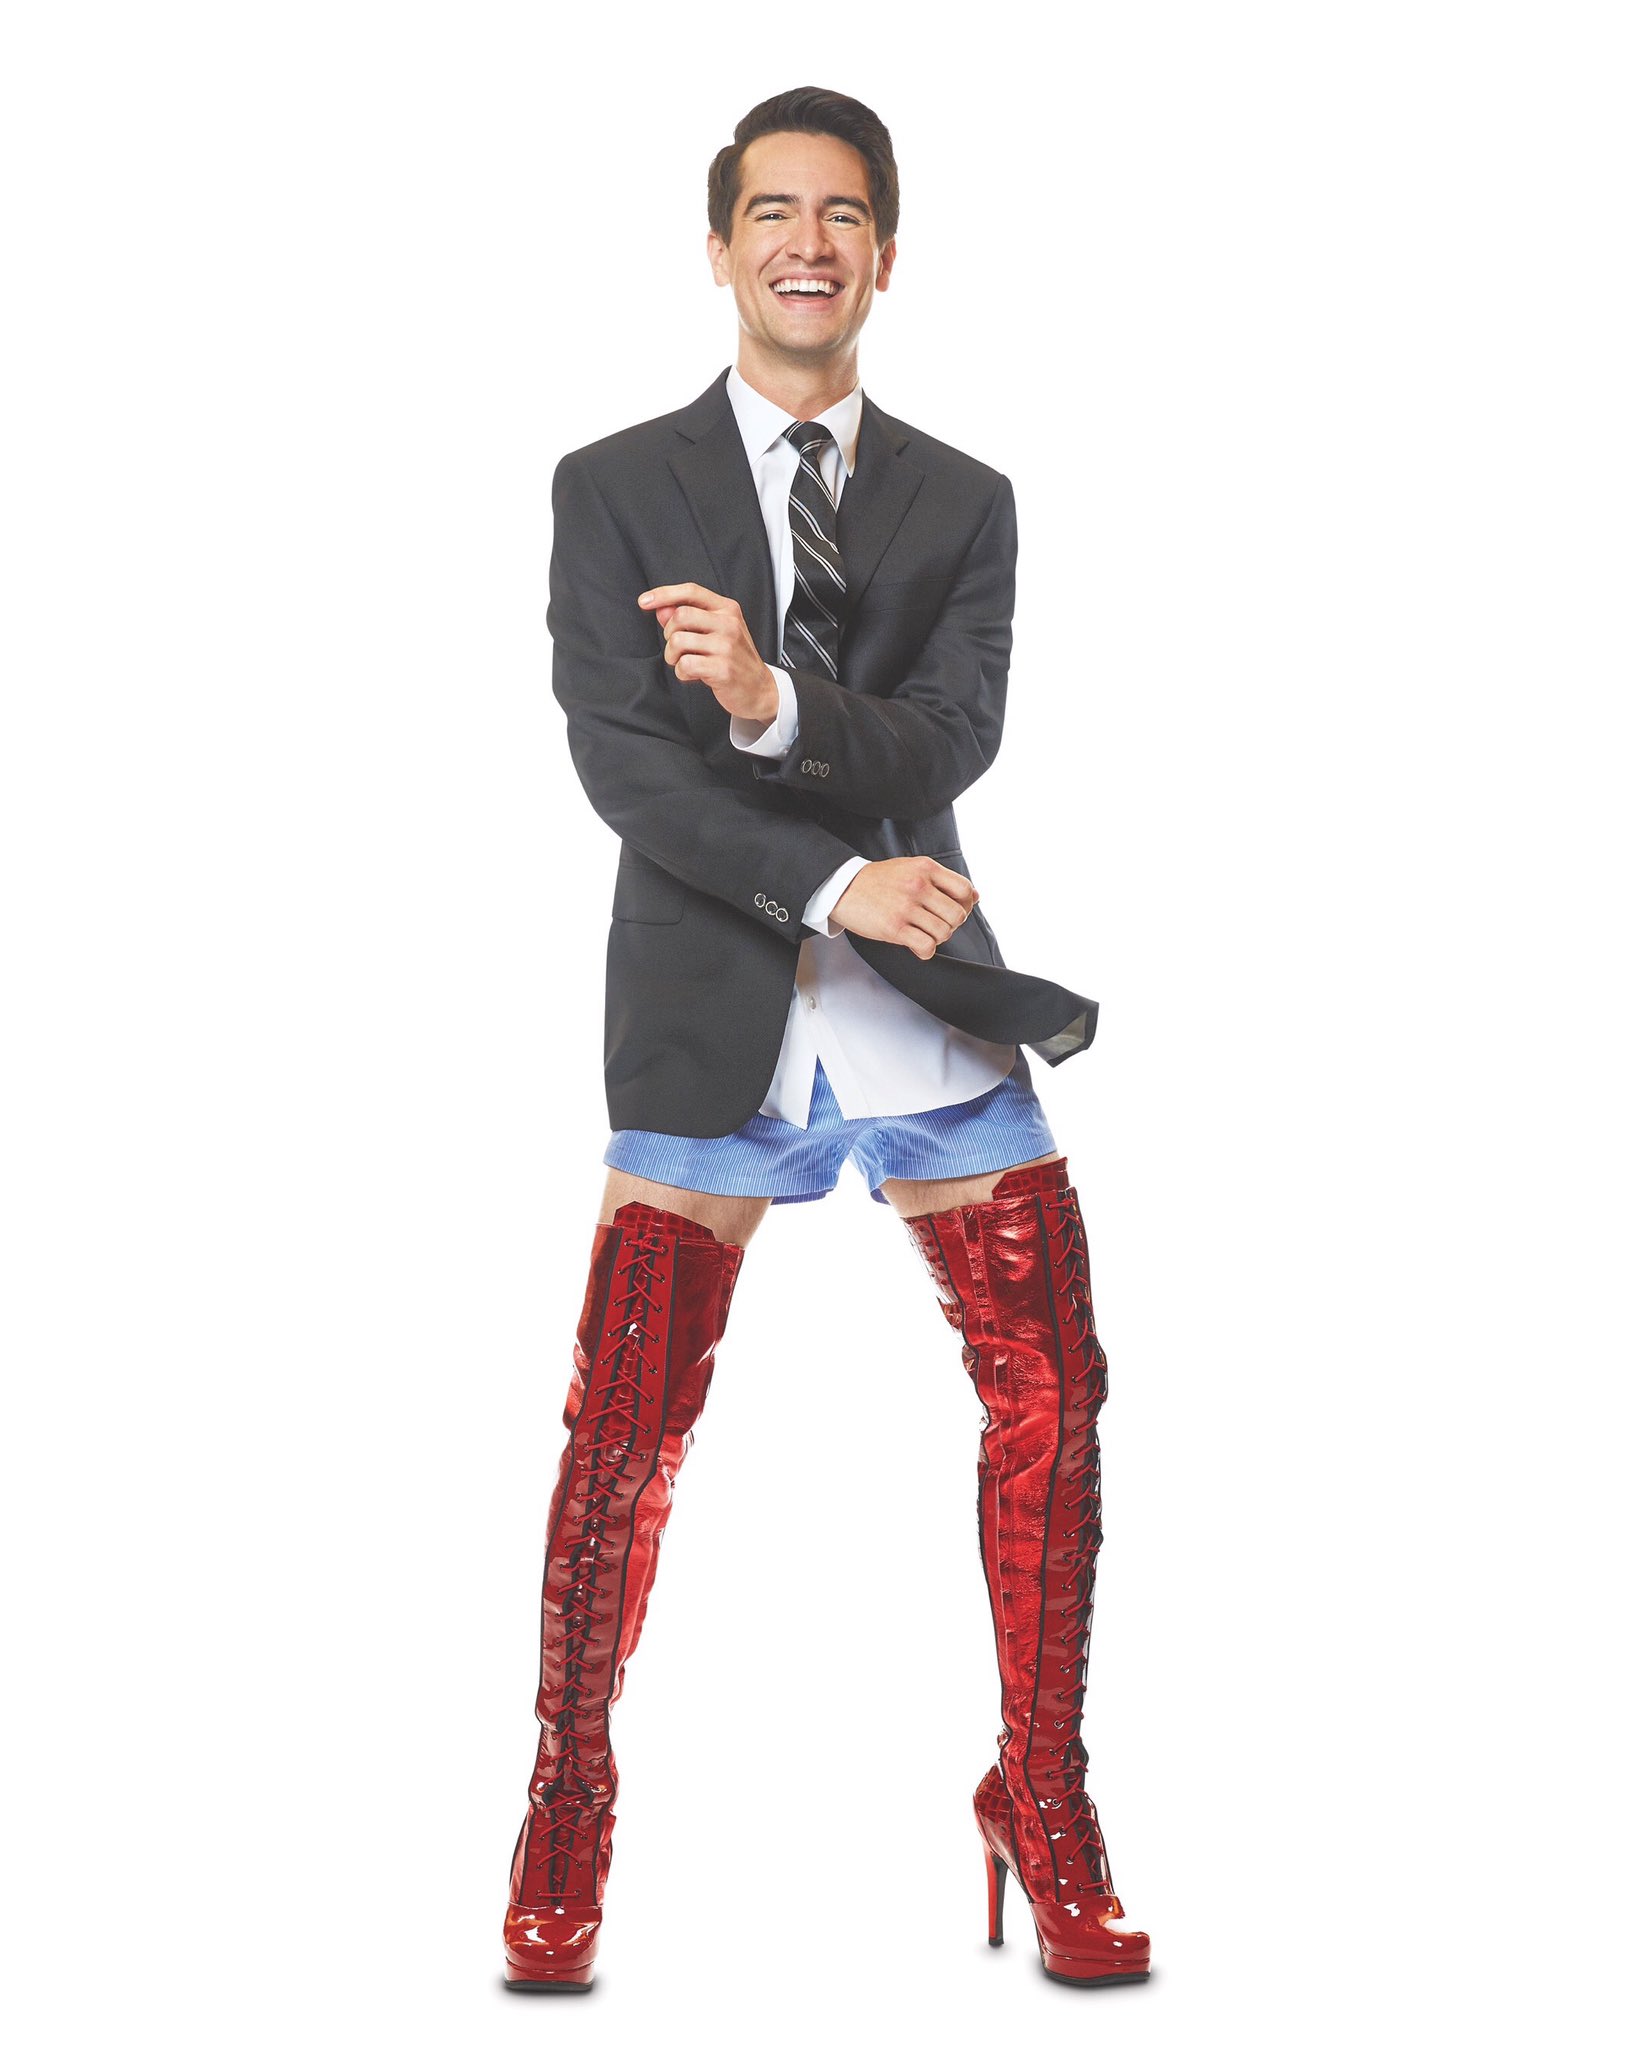 PHOTO OF THE DAY: KINKY BOOTS starring Brendon Urie. Happy birthday!! 